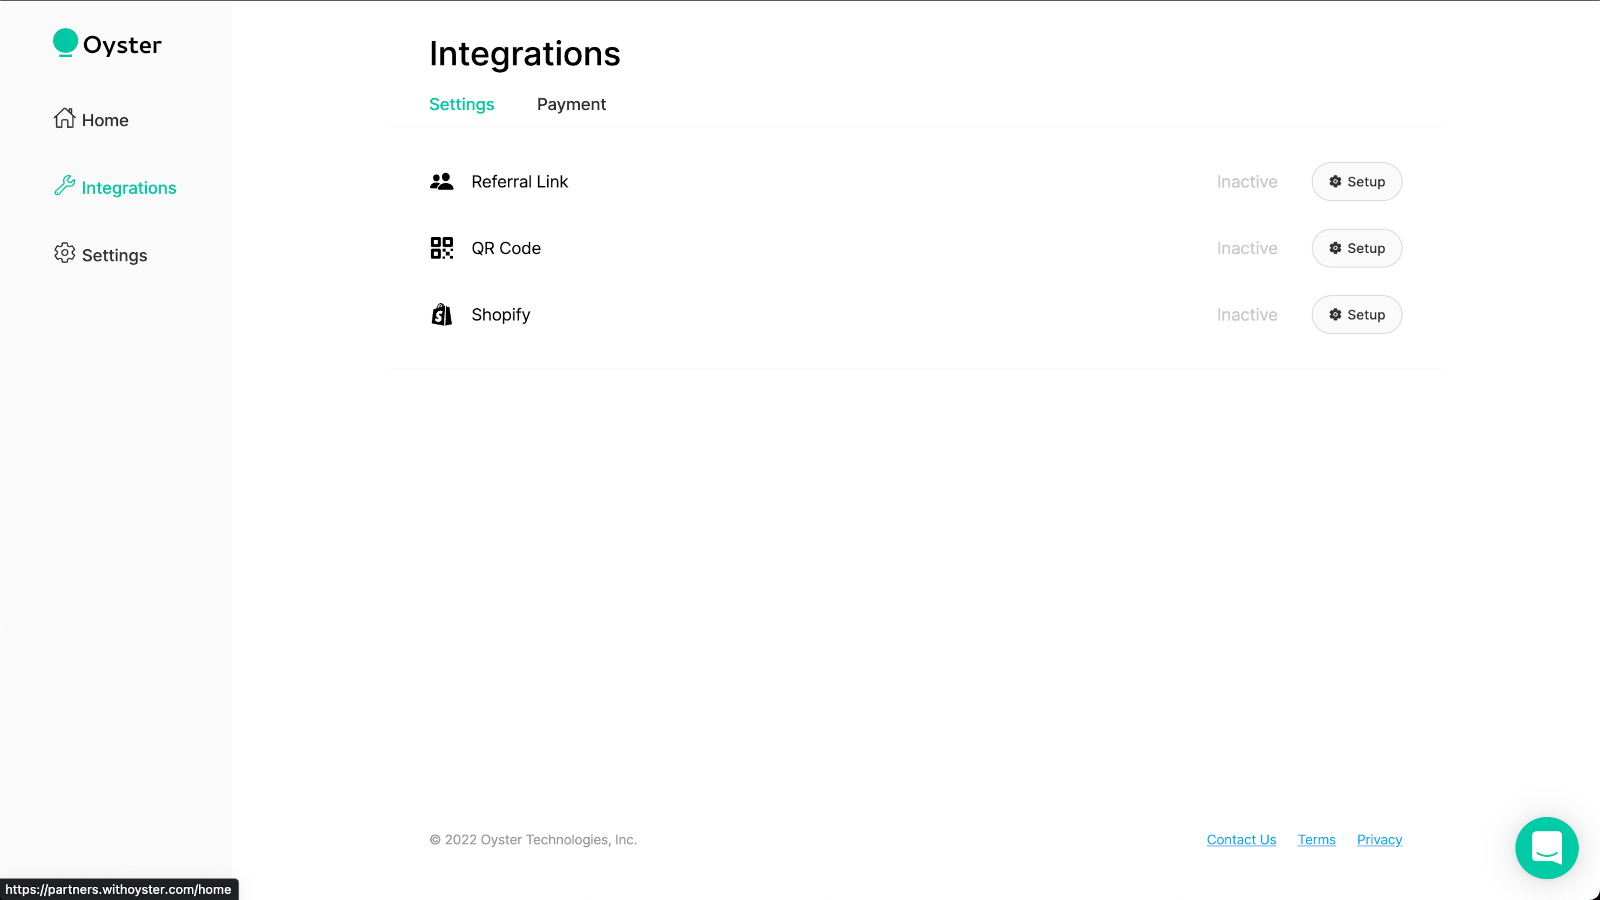 View integrations and metrics in the Oyster partner dashboard.